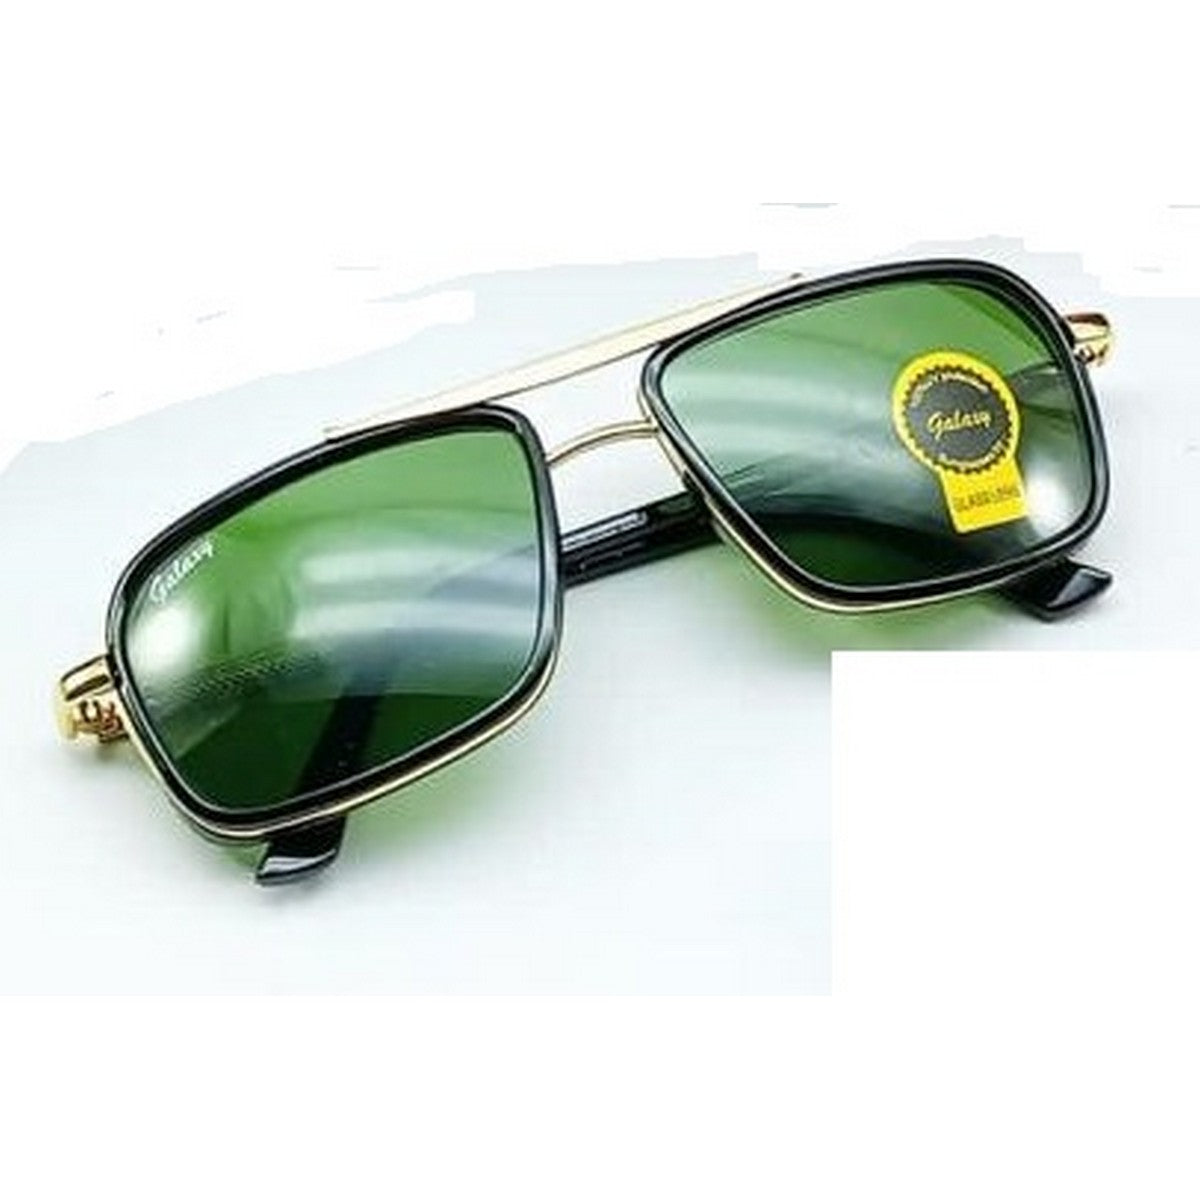 Stylish Rectangle Metal Sunglasses with G15 Glass Lens - Gold Frame, Black Front